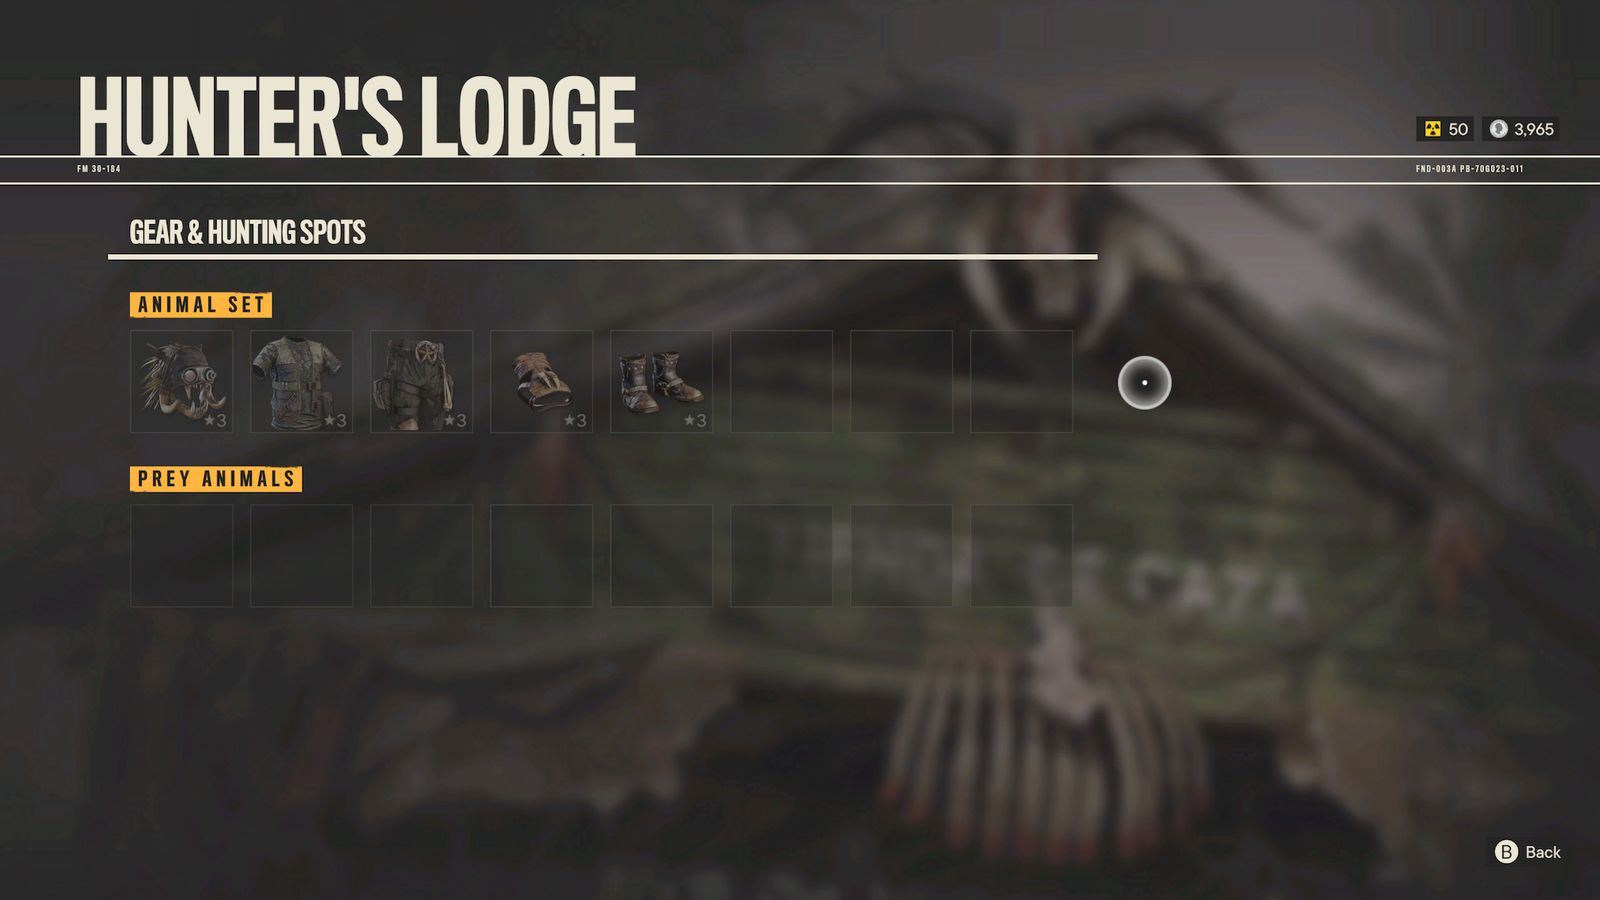 The contents of the Far Cry 6 Hunter's Lodge, including an animal set known as the Primal Gear set.